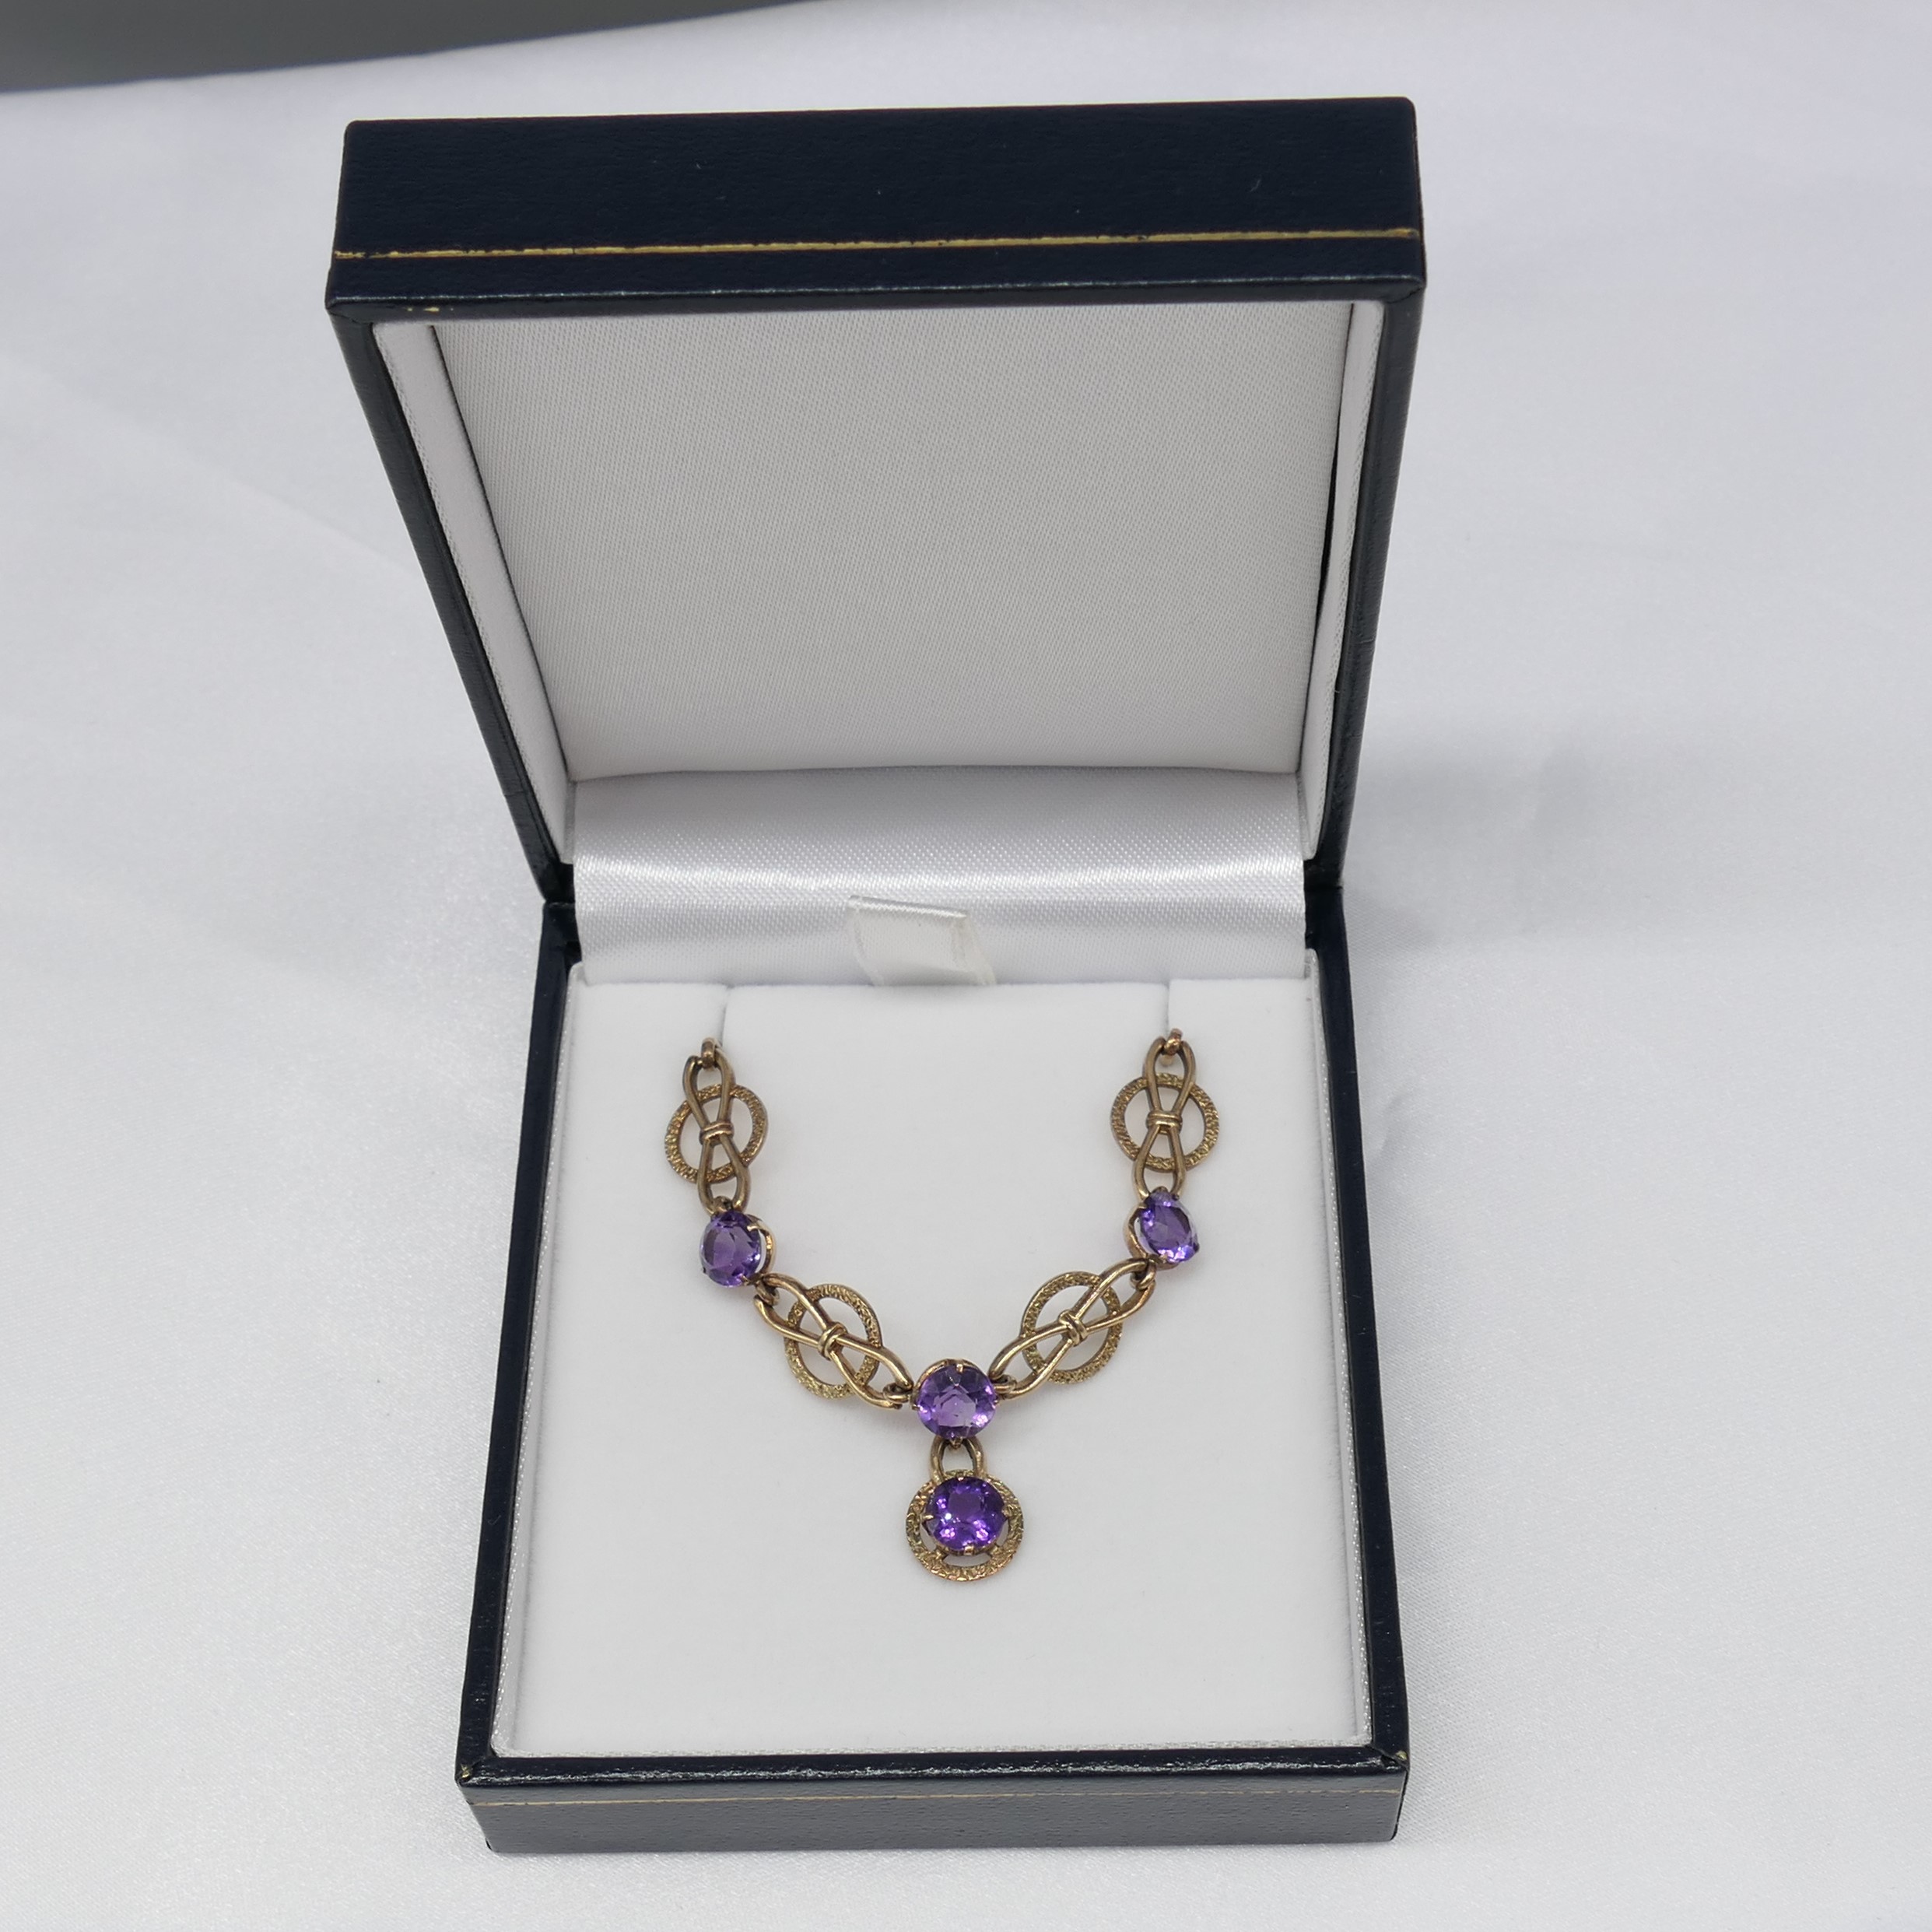 Ornate vintage 9ct yellow gold necklace set with round-cut purple amethysts - Image 3 of 9